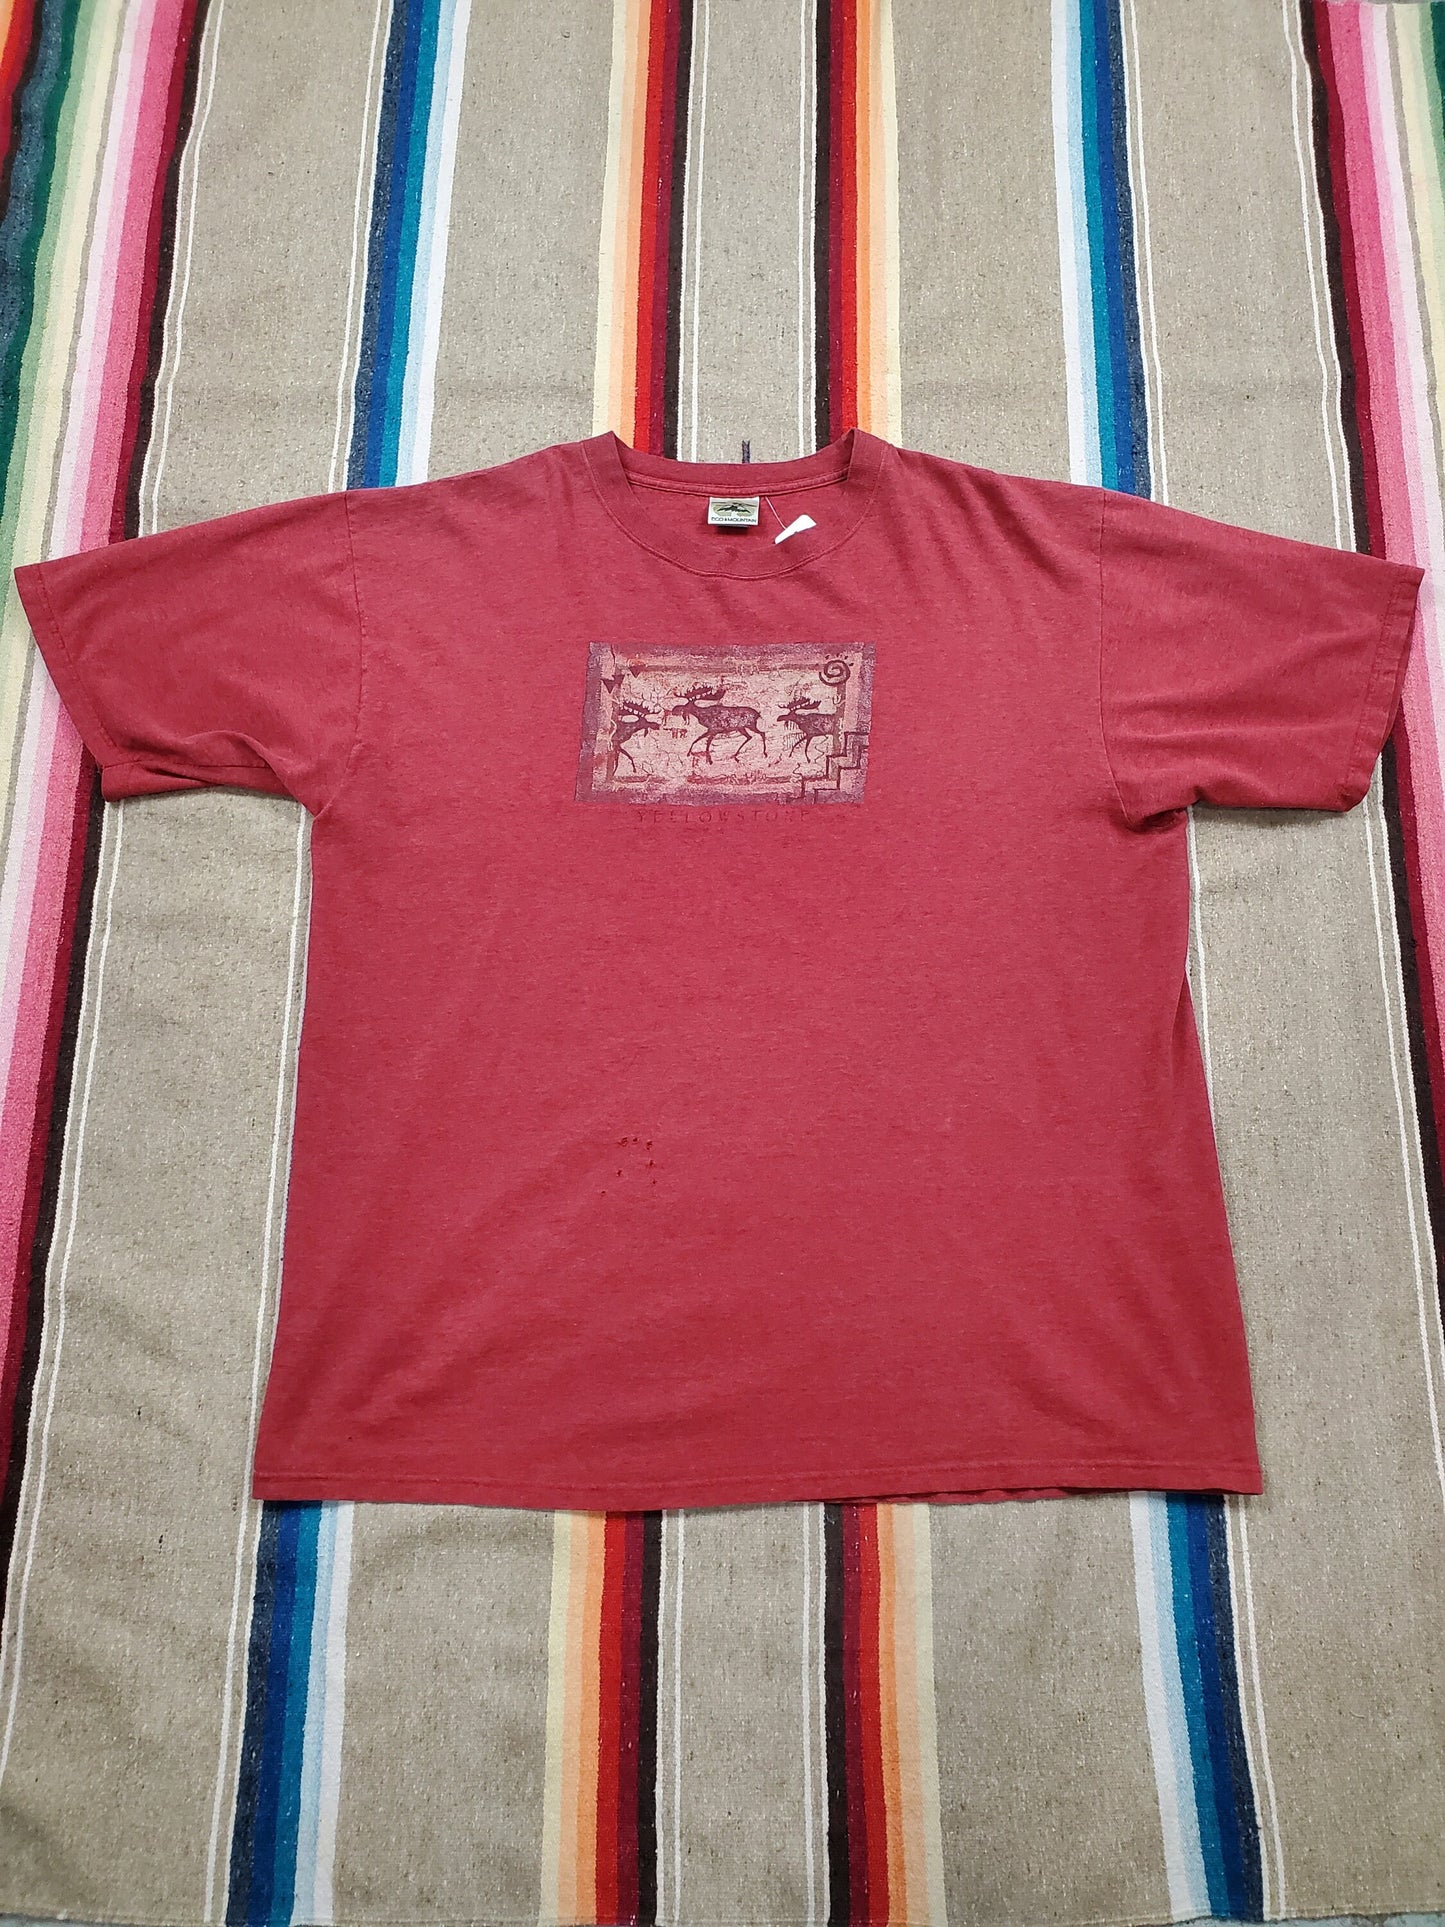 1990s/2000s Eco Mountain Yellowstone National Park T-Shirt Made in USA Size XXL